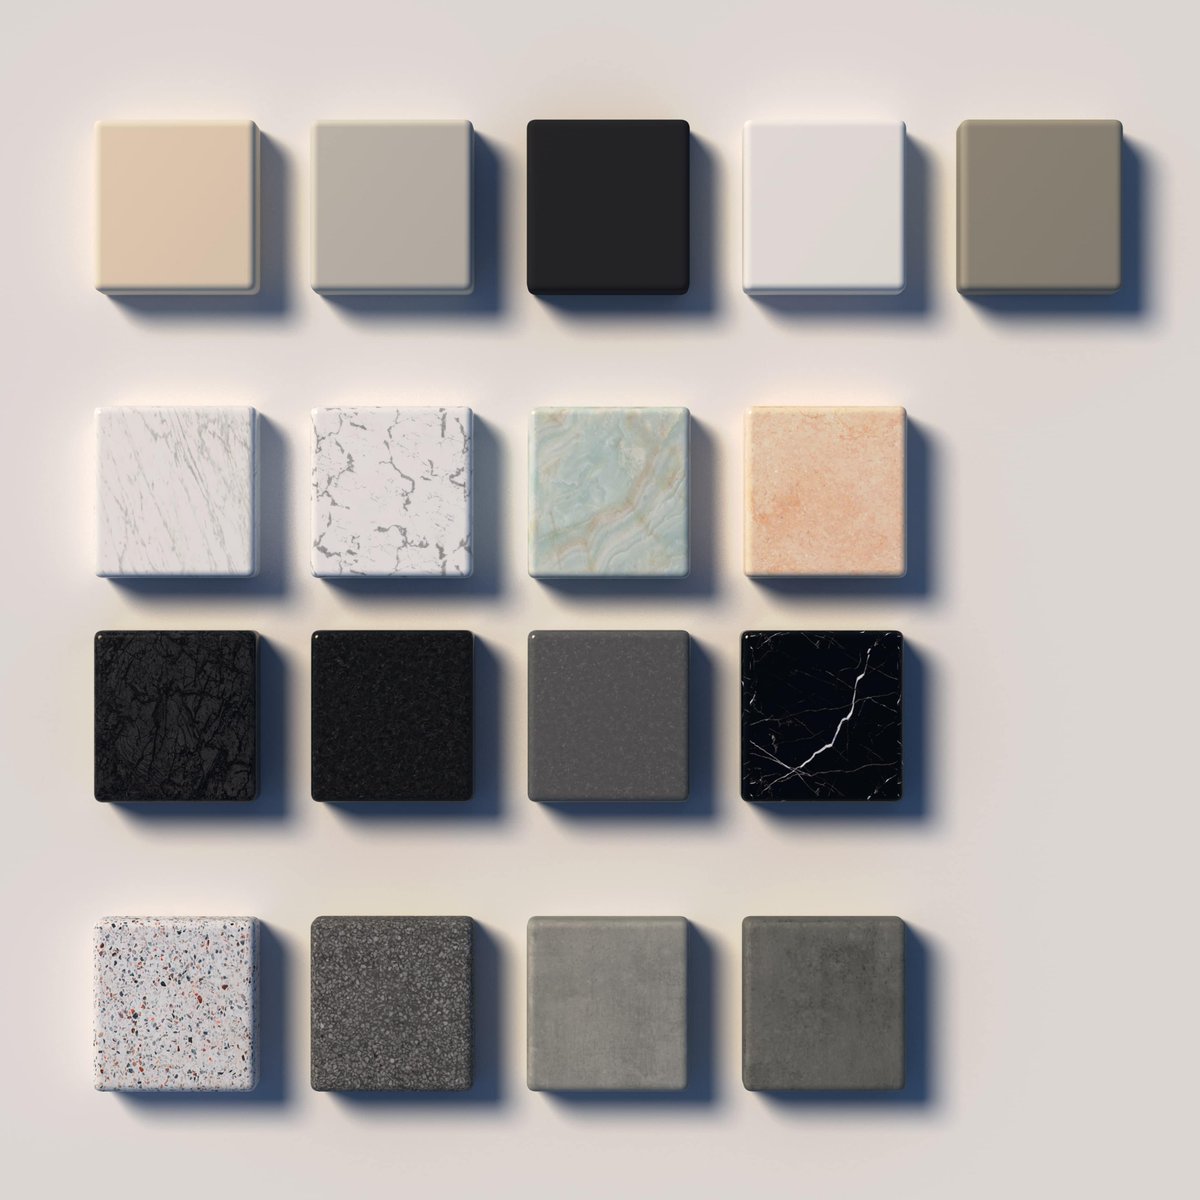 Sustonable material is thin, lightweight, ultra-resistant, sizeable, and with unlimited designs that look like natural stone. Wanna see more?
ow.ly/JWmP50DduVM
#decor #interiordesign #furniture #sustainble #innovativematerials #greenhome #architect #materialinspiration